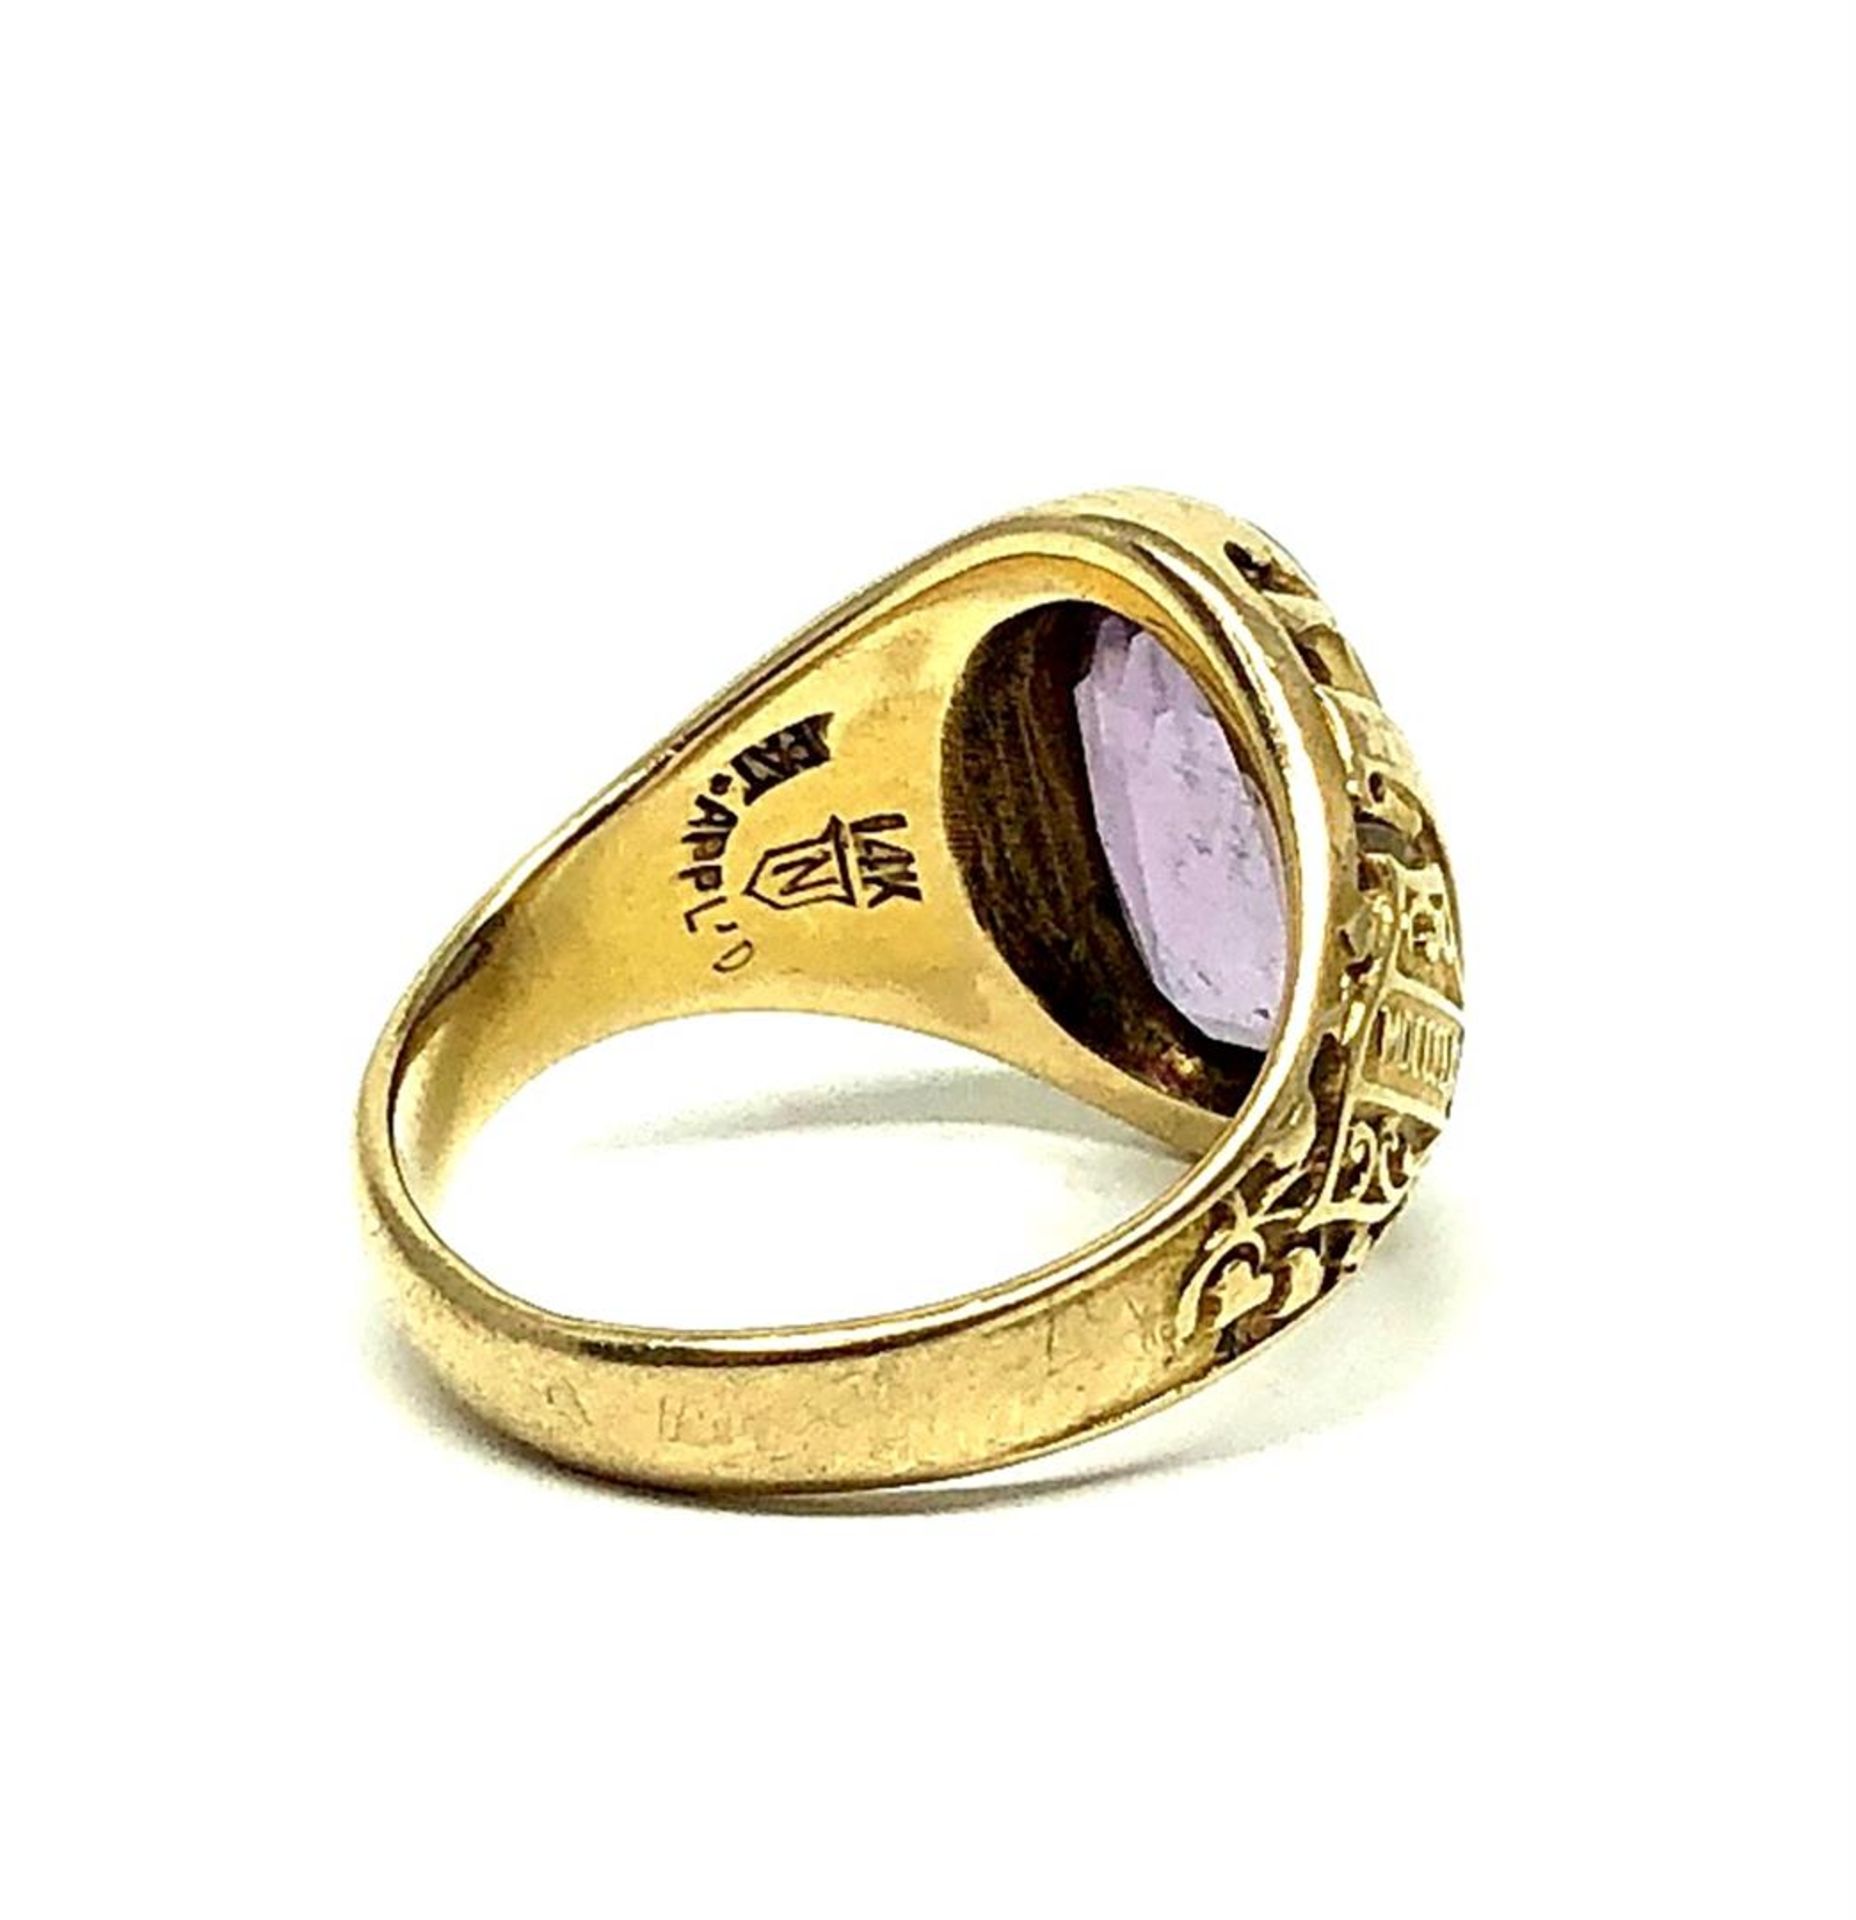 3.70 ctw Cabochon Mixed Amethyst Ring - 14KT Yellow Gold - Image 4 of 4